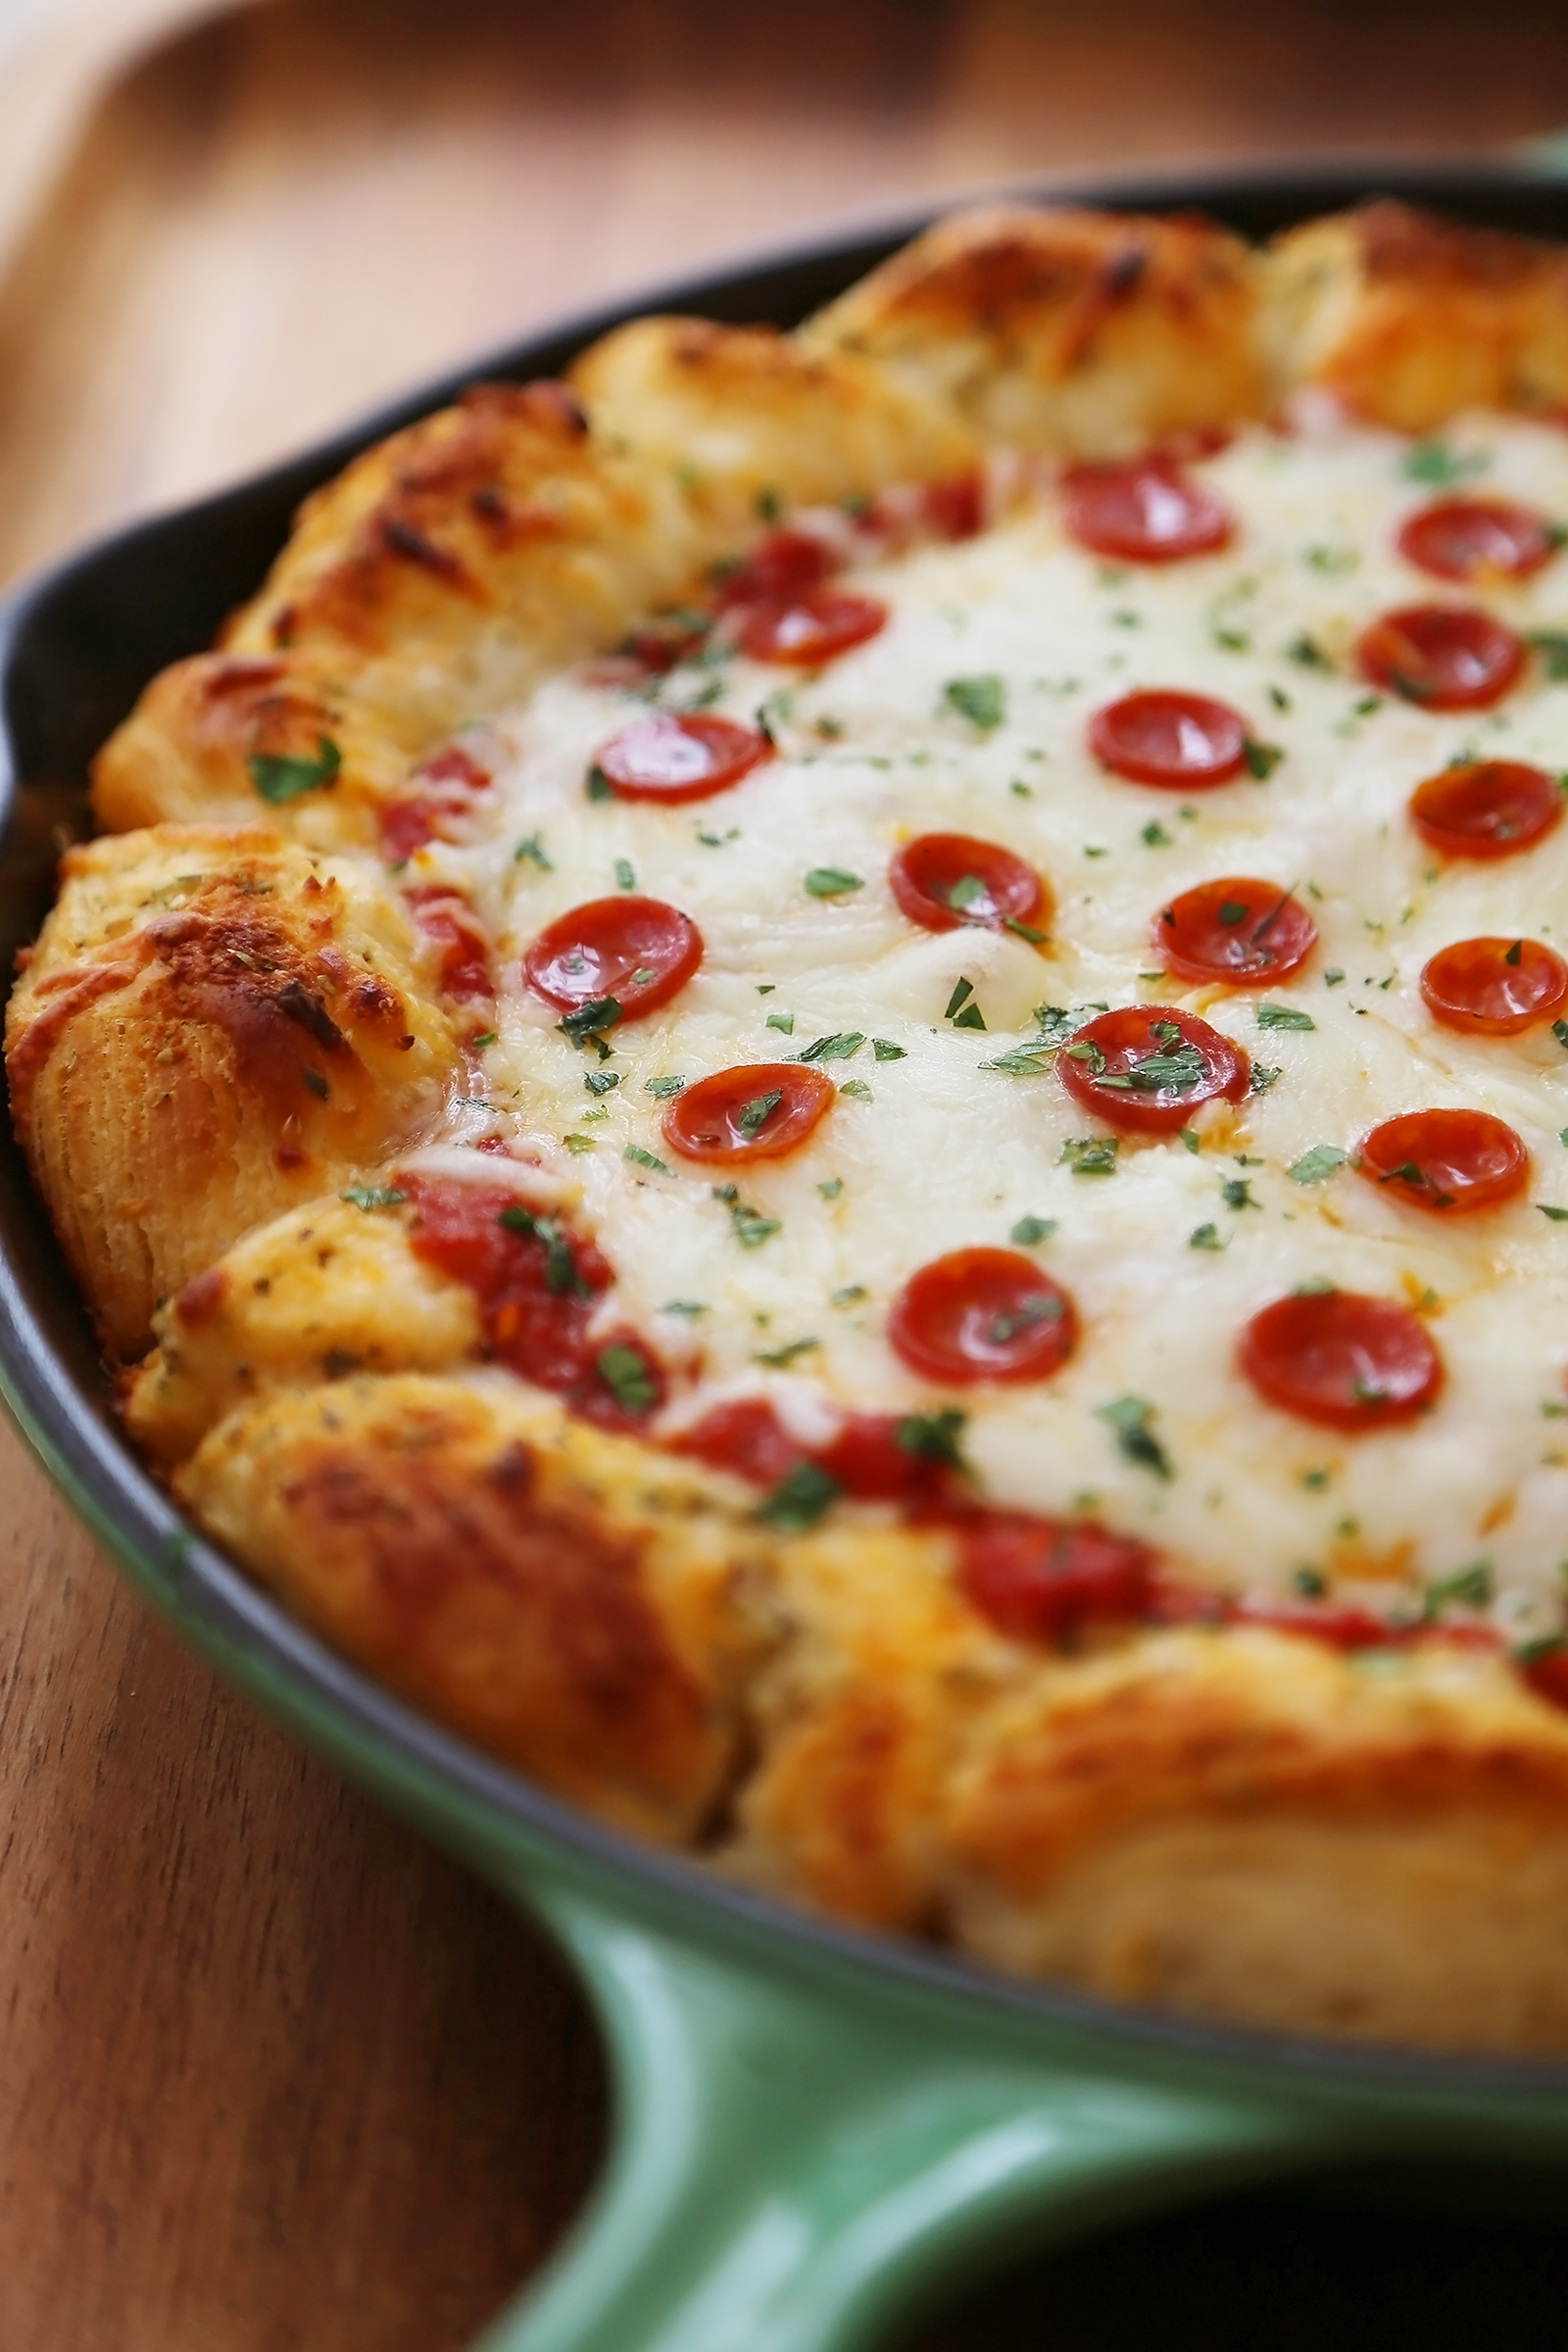 Cheesy Deep Dish Pepperoni Pizza Bites – Pull-apart cheesy pepperoni pizza bread, made easily with biscuits! Add fave toppings and serve for game day, or family nights! thecomfortofcooking.com